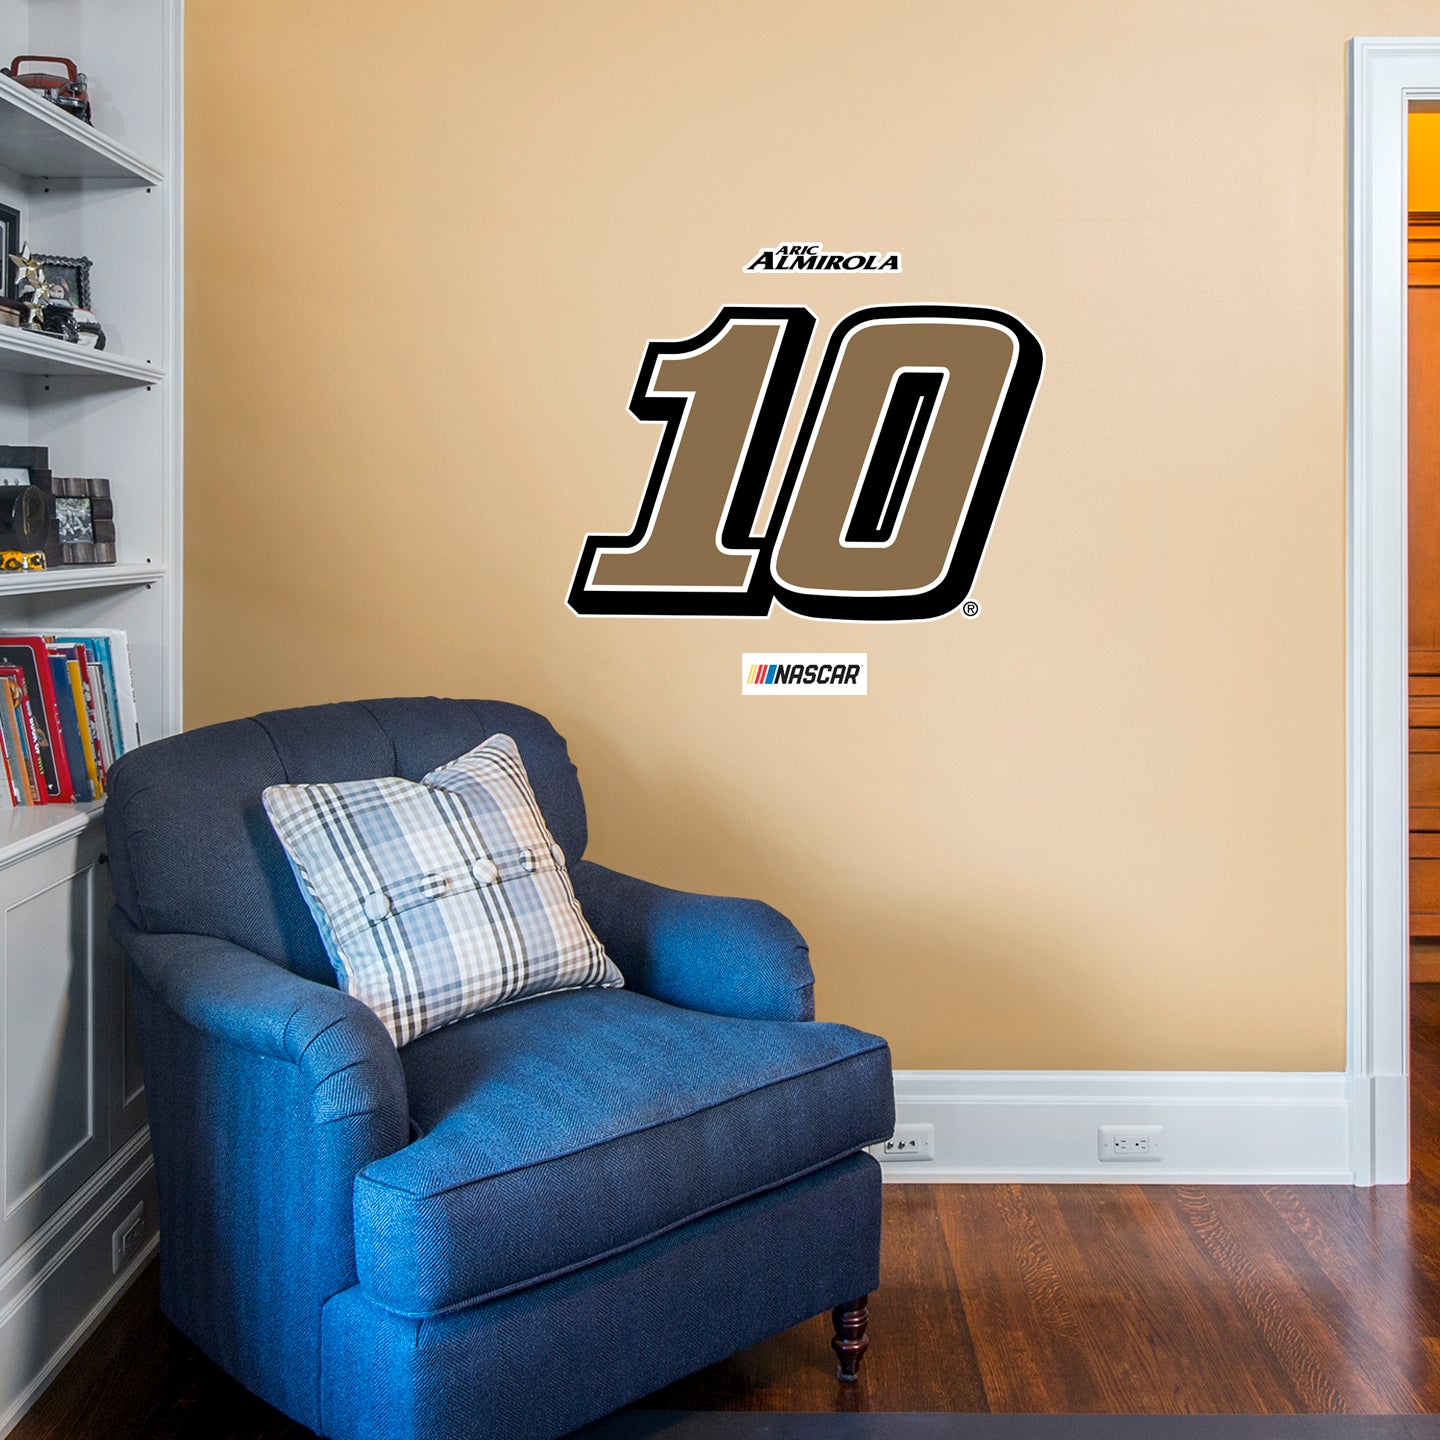 Aric Almirola 2021 #10 Logo - Officially Licensed NASCAR Removable Wall Decal XL by Fathead | Vinyl